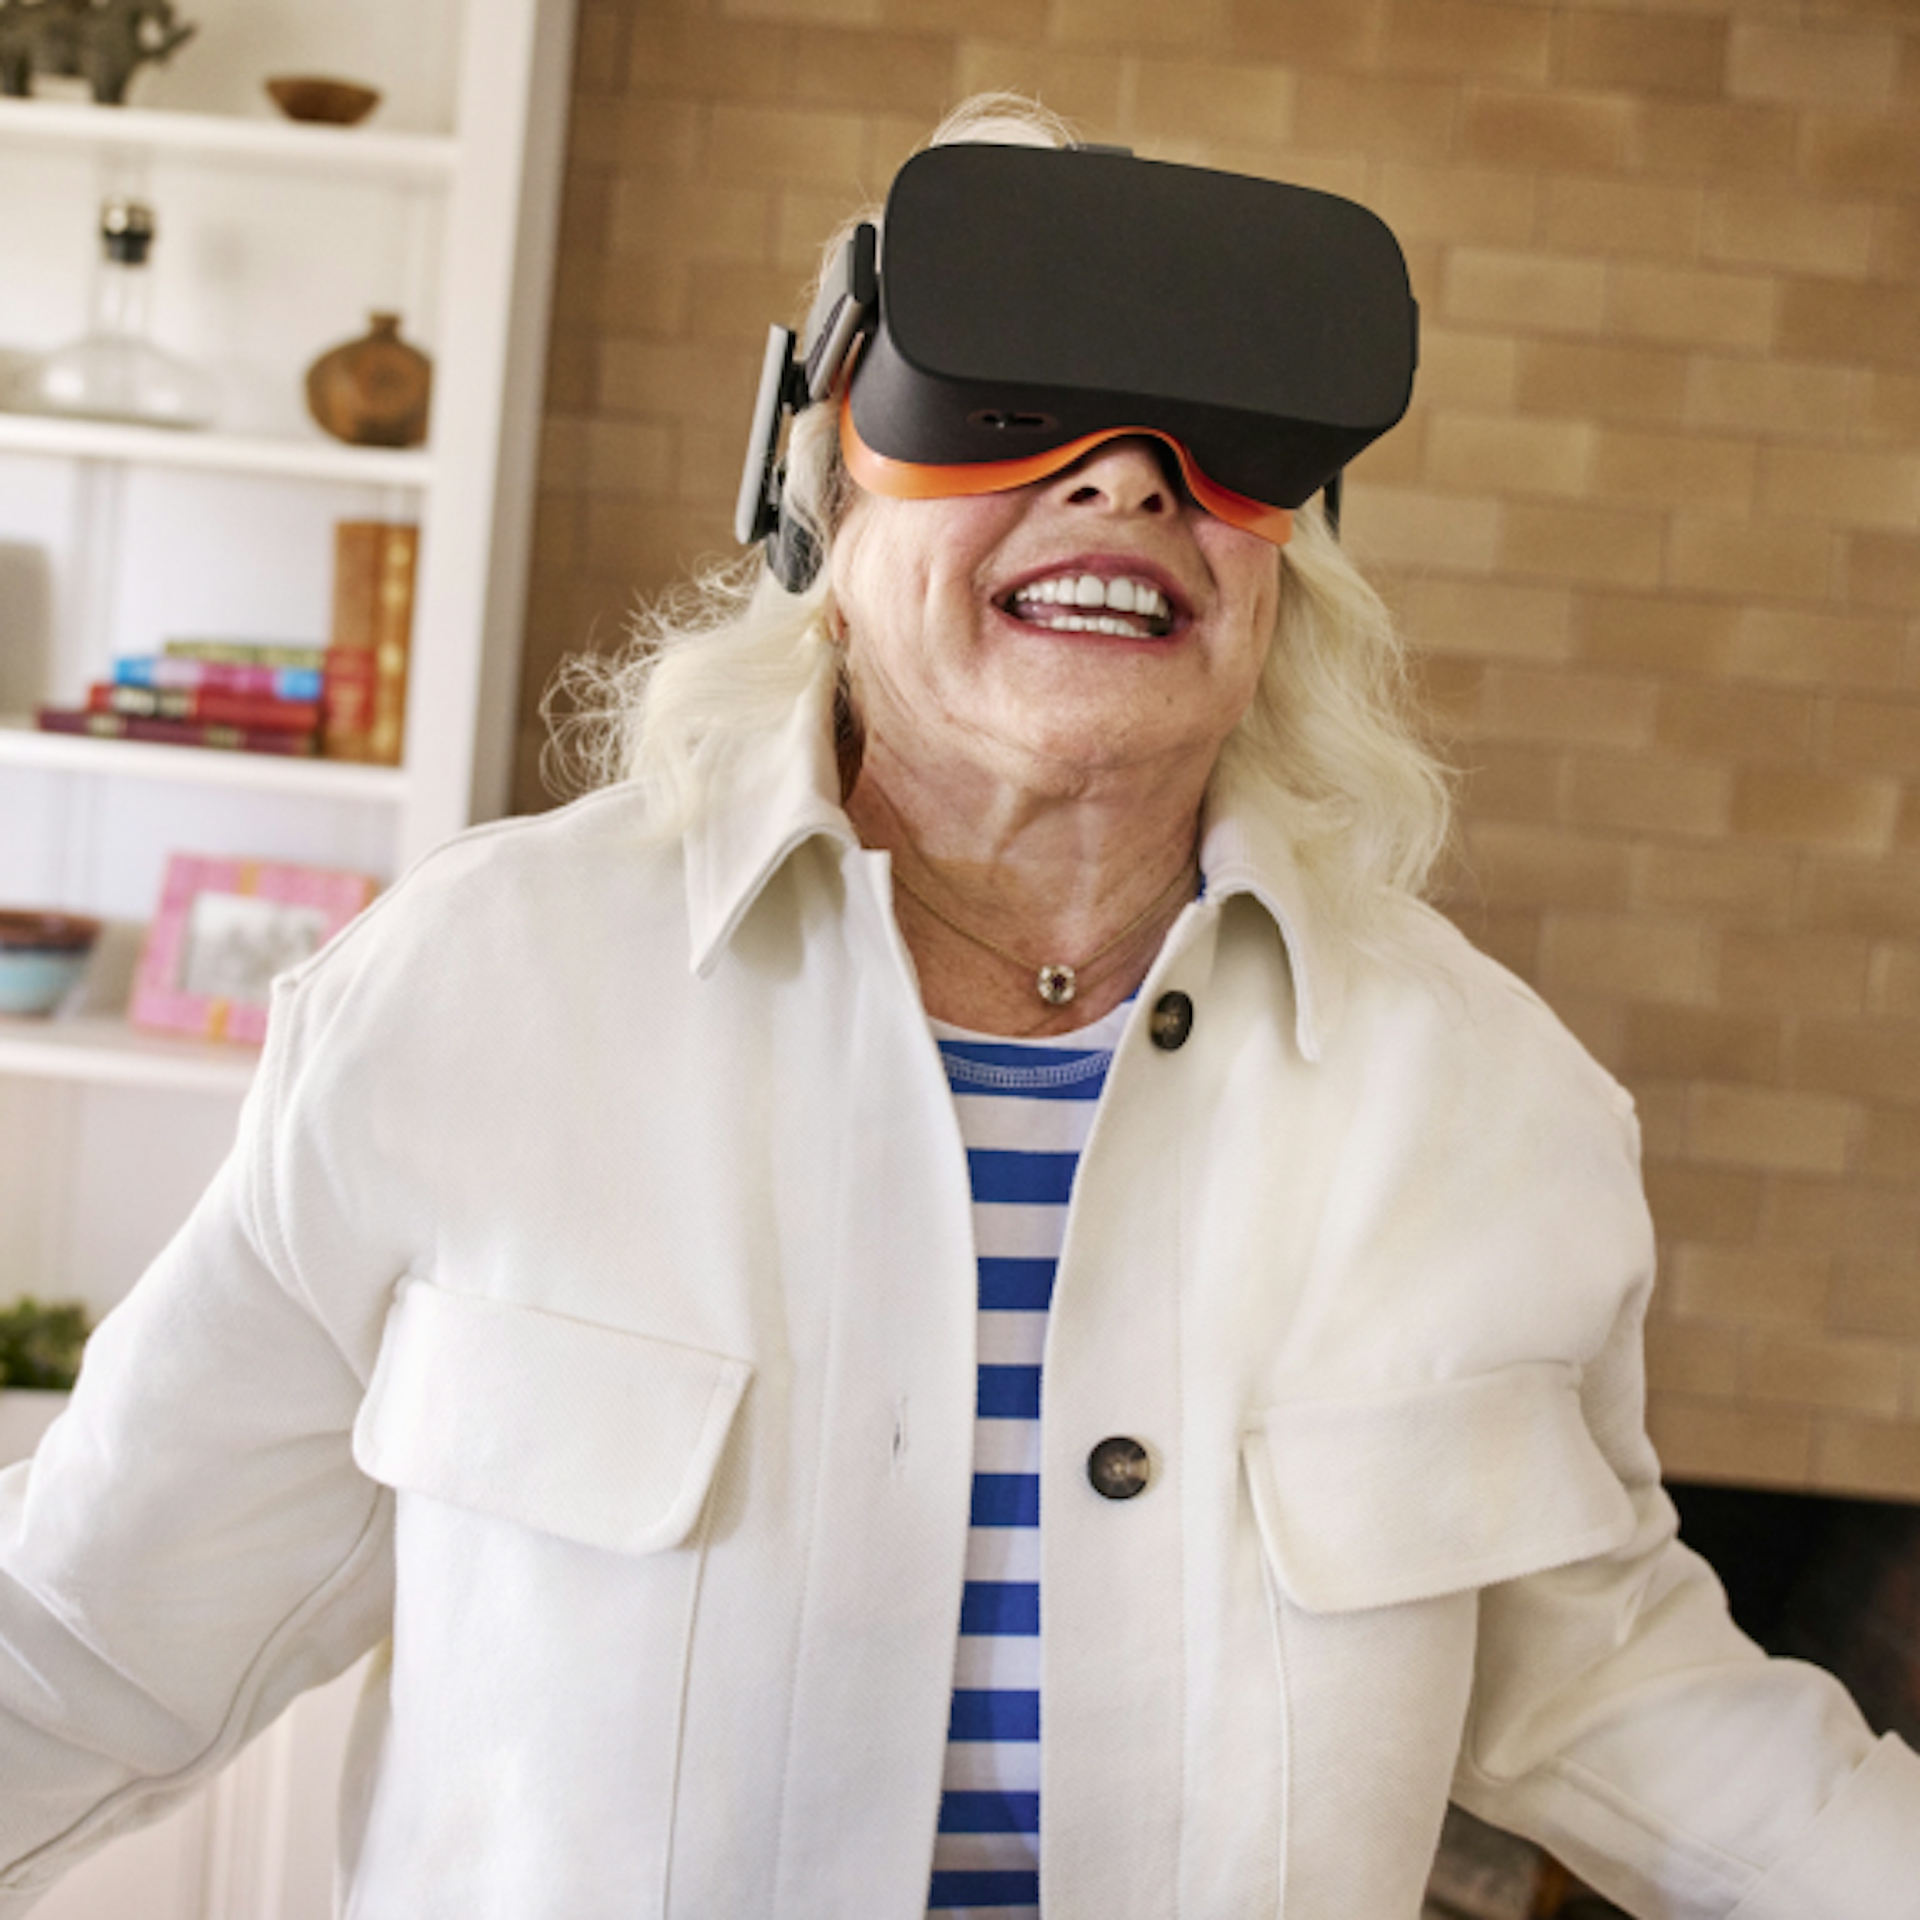 An older woman is enjoying a virtual reality experience, wearing a VR headset. She is dressed in a white jacket over a blue and white striped shirt, smiling with excitement. The background shows a cozy room with bookshelves and a brick wall.